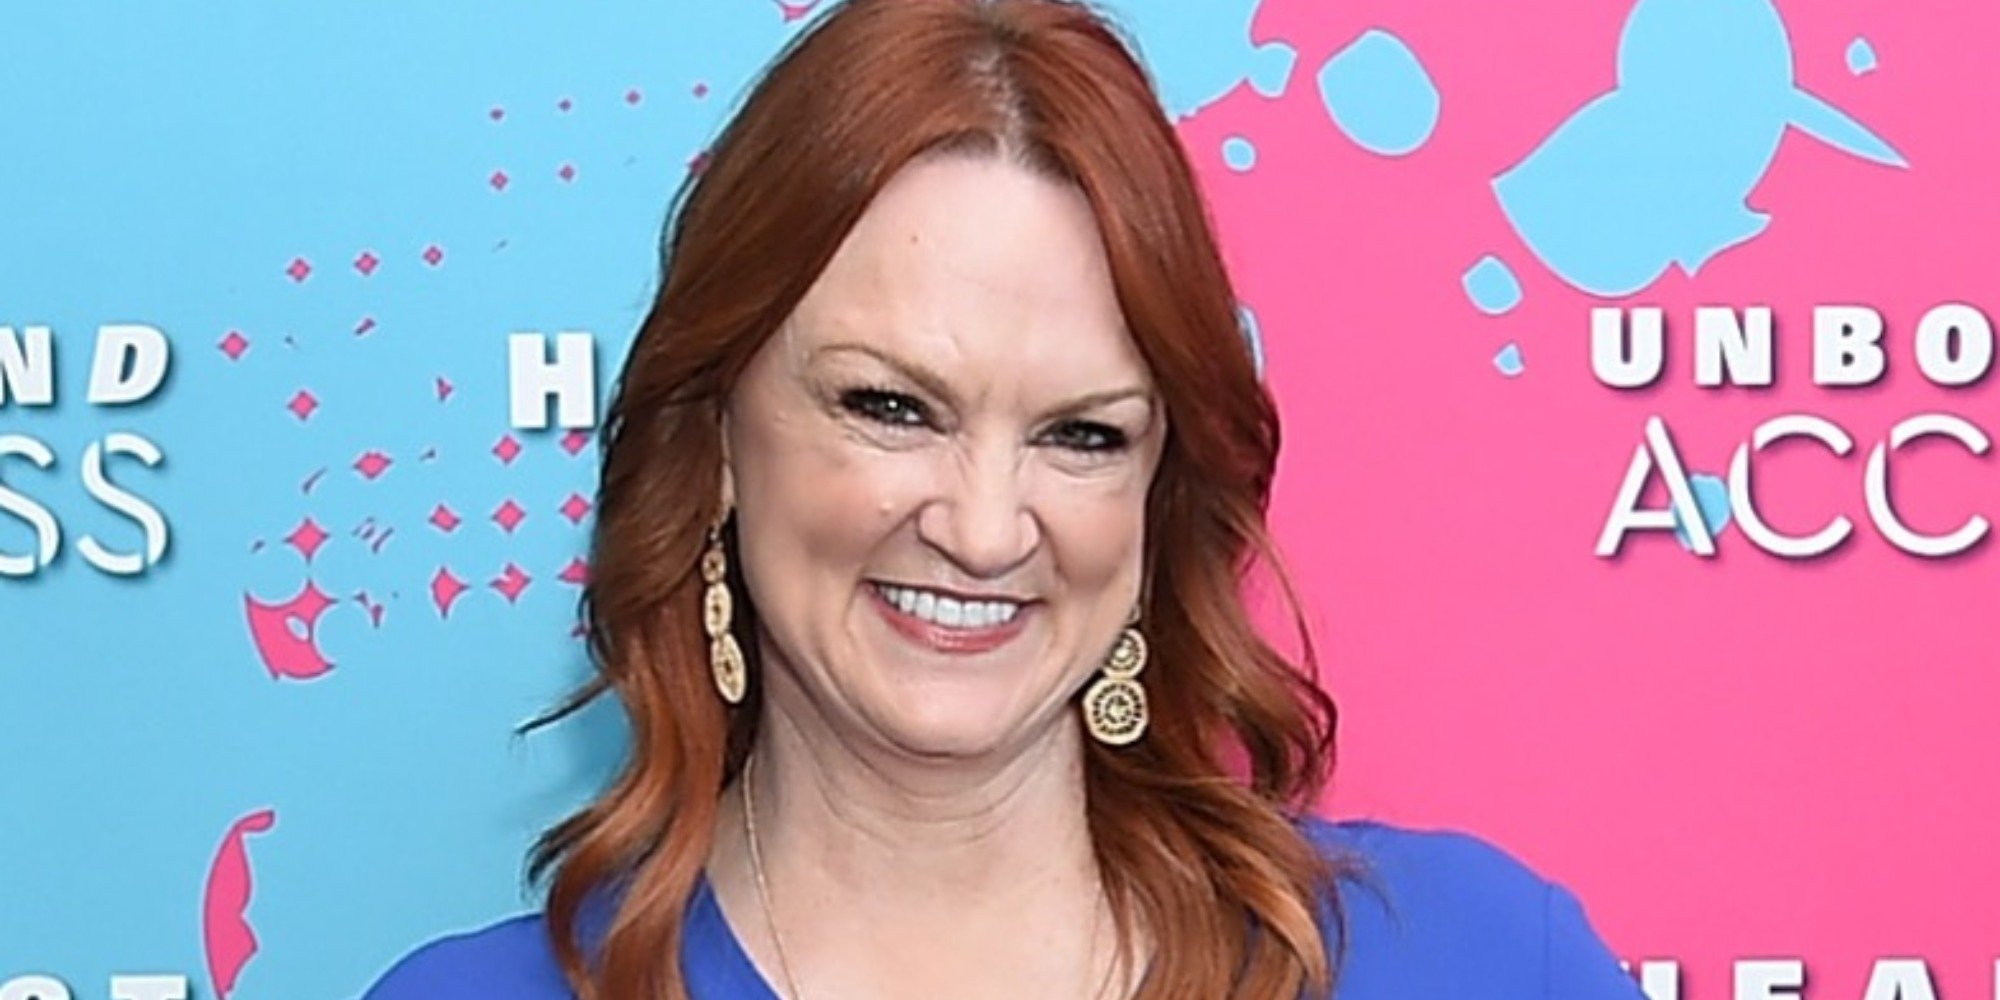 Ree Drummond poses for a photo on the red carpet.